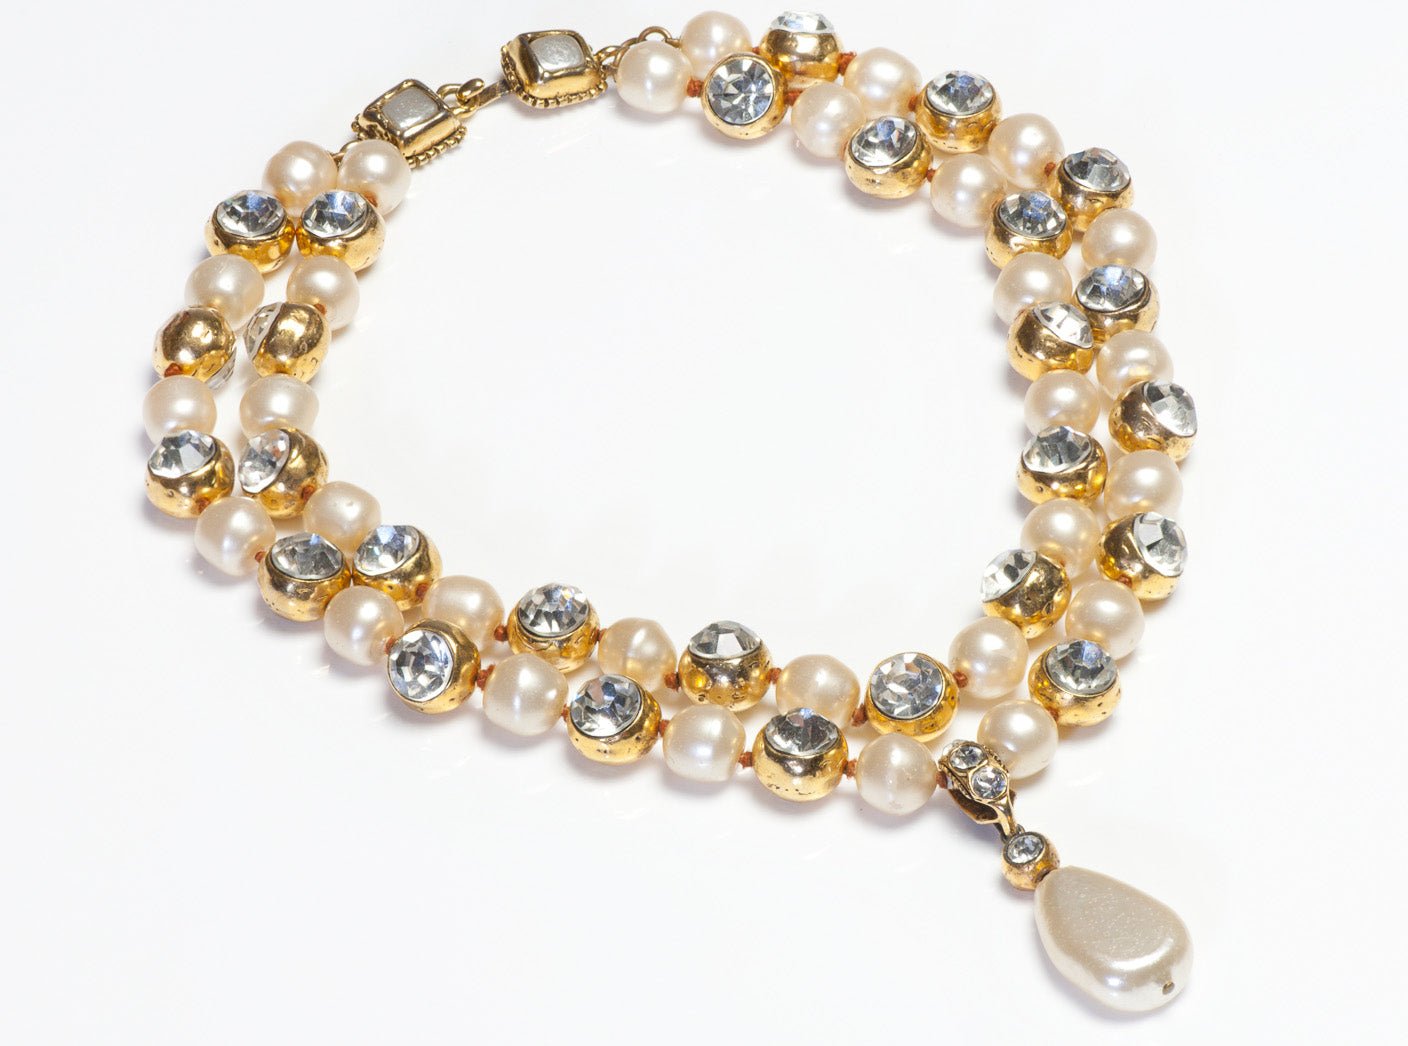 Chanel Paris 1980’s Goossens Hammered Gold Metal Crystal Pearl Beads Necklace - DSF Antique Jewelry